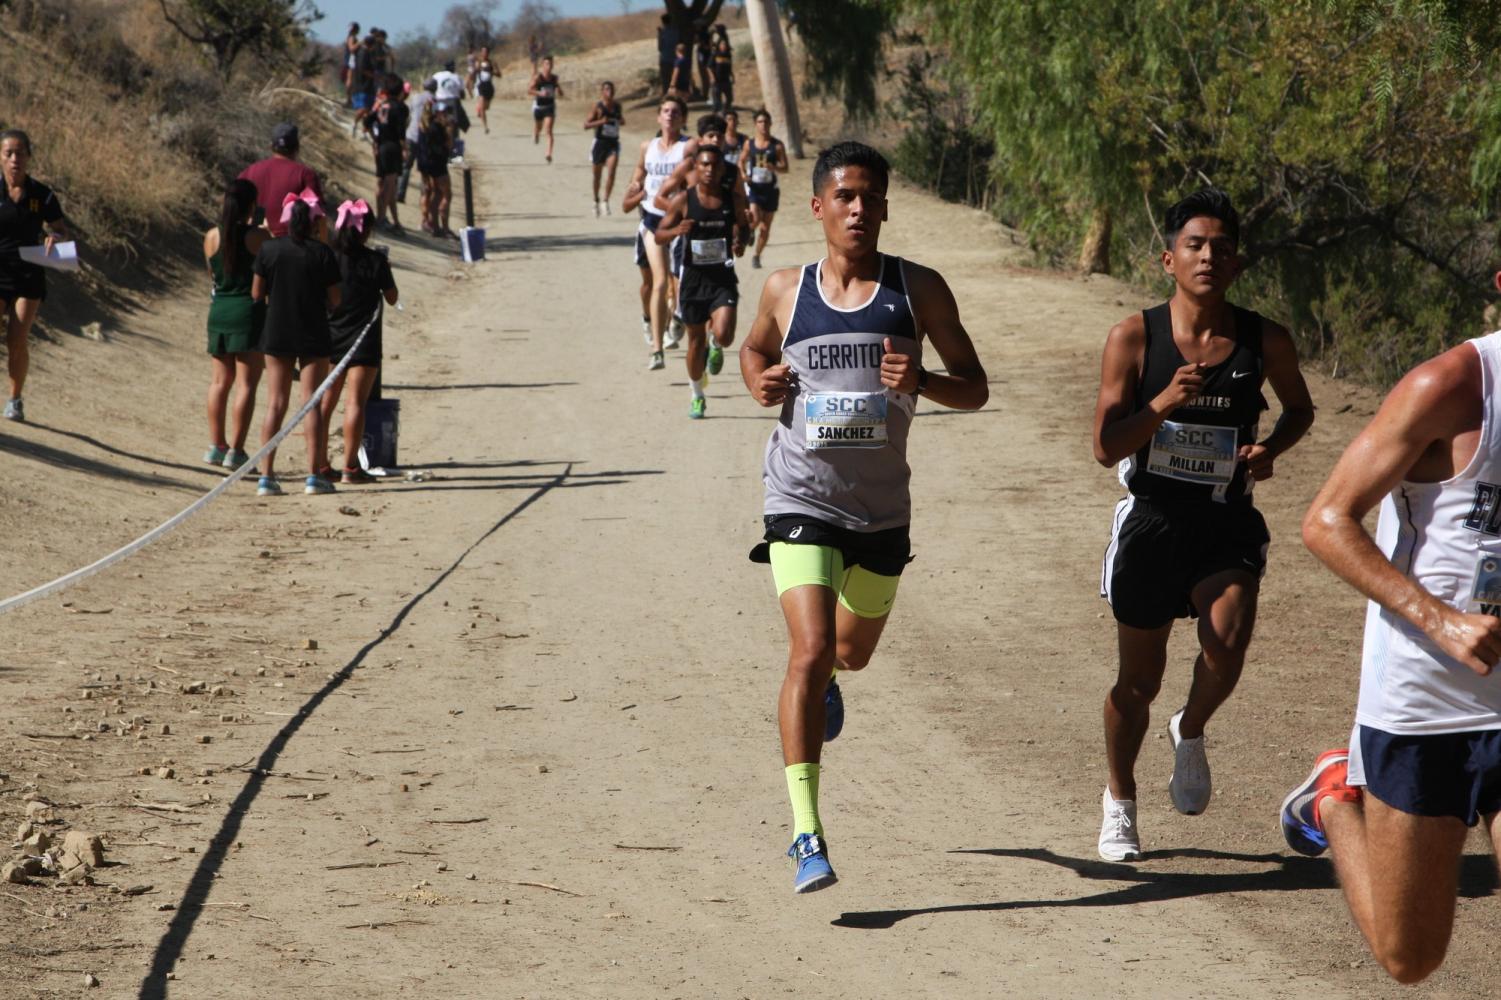 Falcons Abraxaz Sanchez coming down hill at the end of the course at Mt.SAC. Sanchez came in sixth place overall. Photo credit: David Jenkins